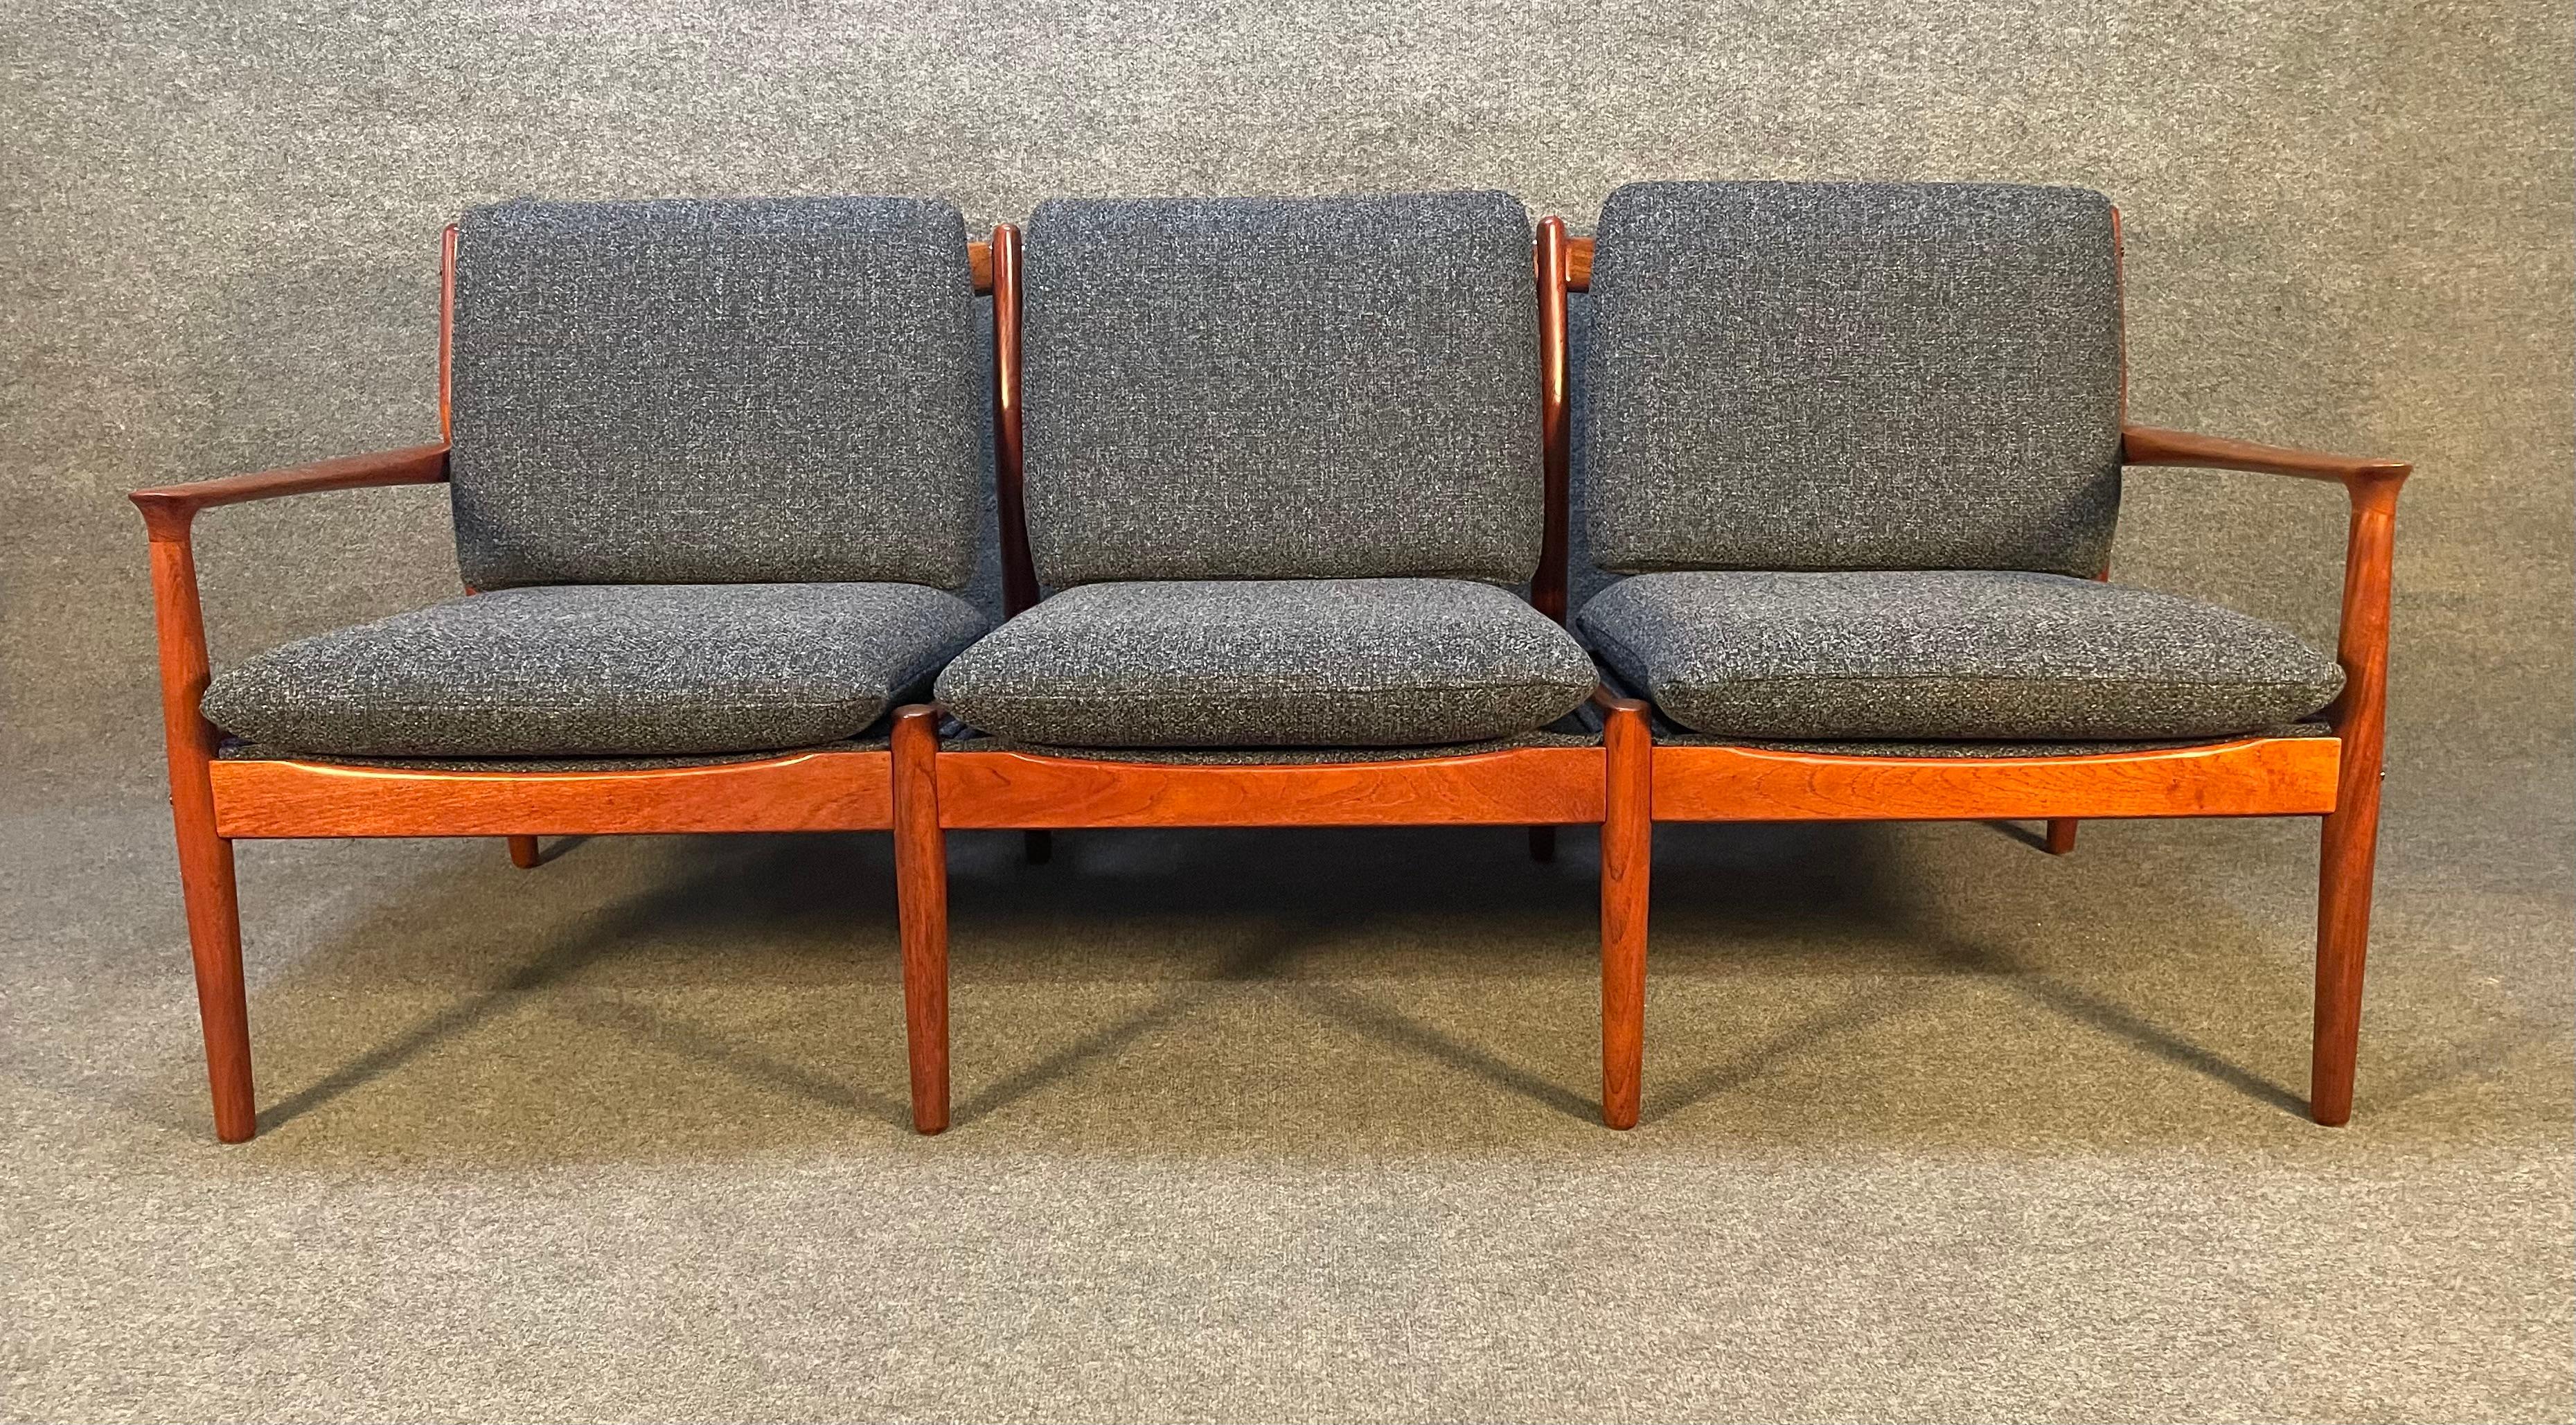 Here is a beautiful Scandinavian modern three seater sofa in teak designed by Svend Aage Eriksen and manufactured by Glostrup Mobelfabrik in Denmark in the 1960's.
This comfortable couch, recently imported from Europe to California before its